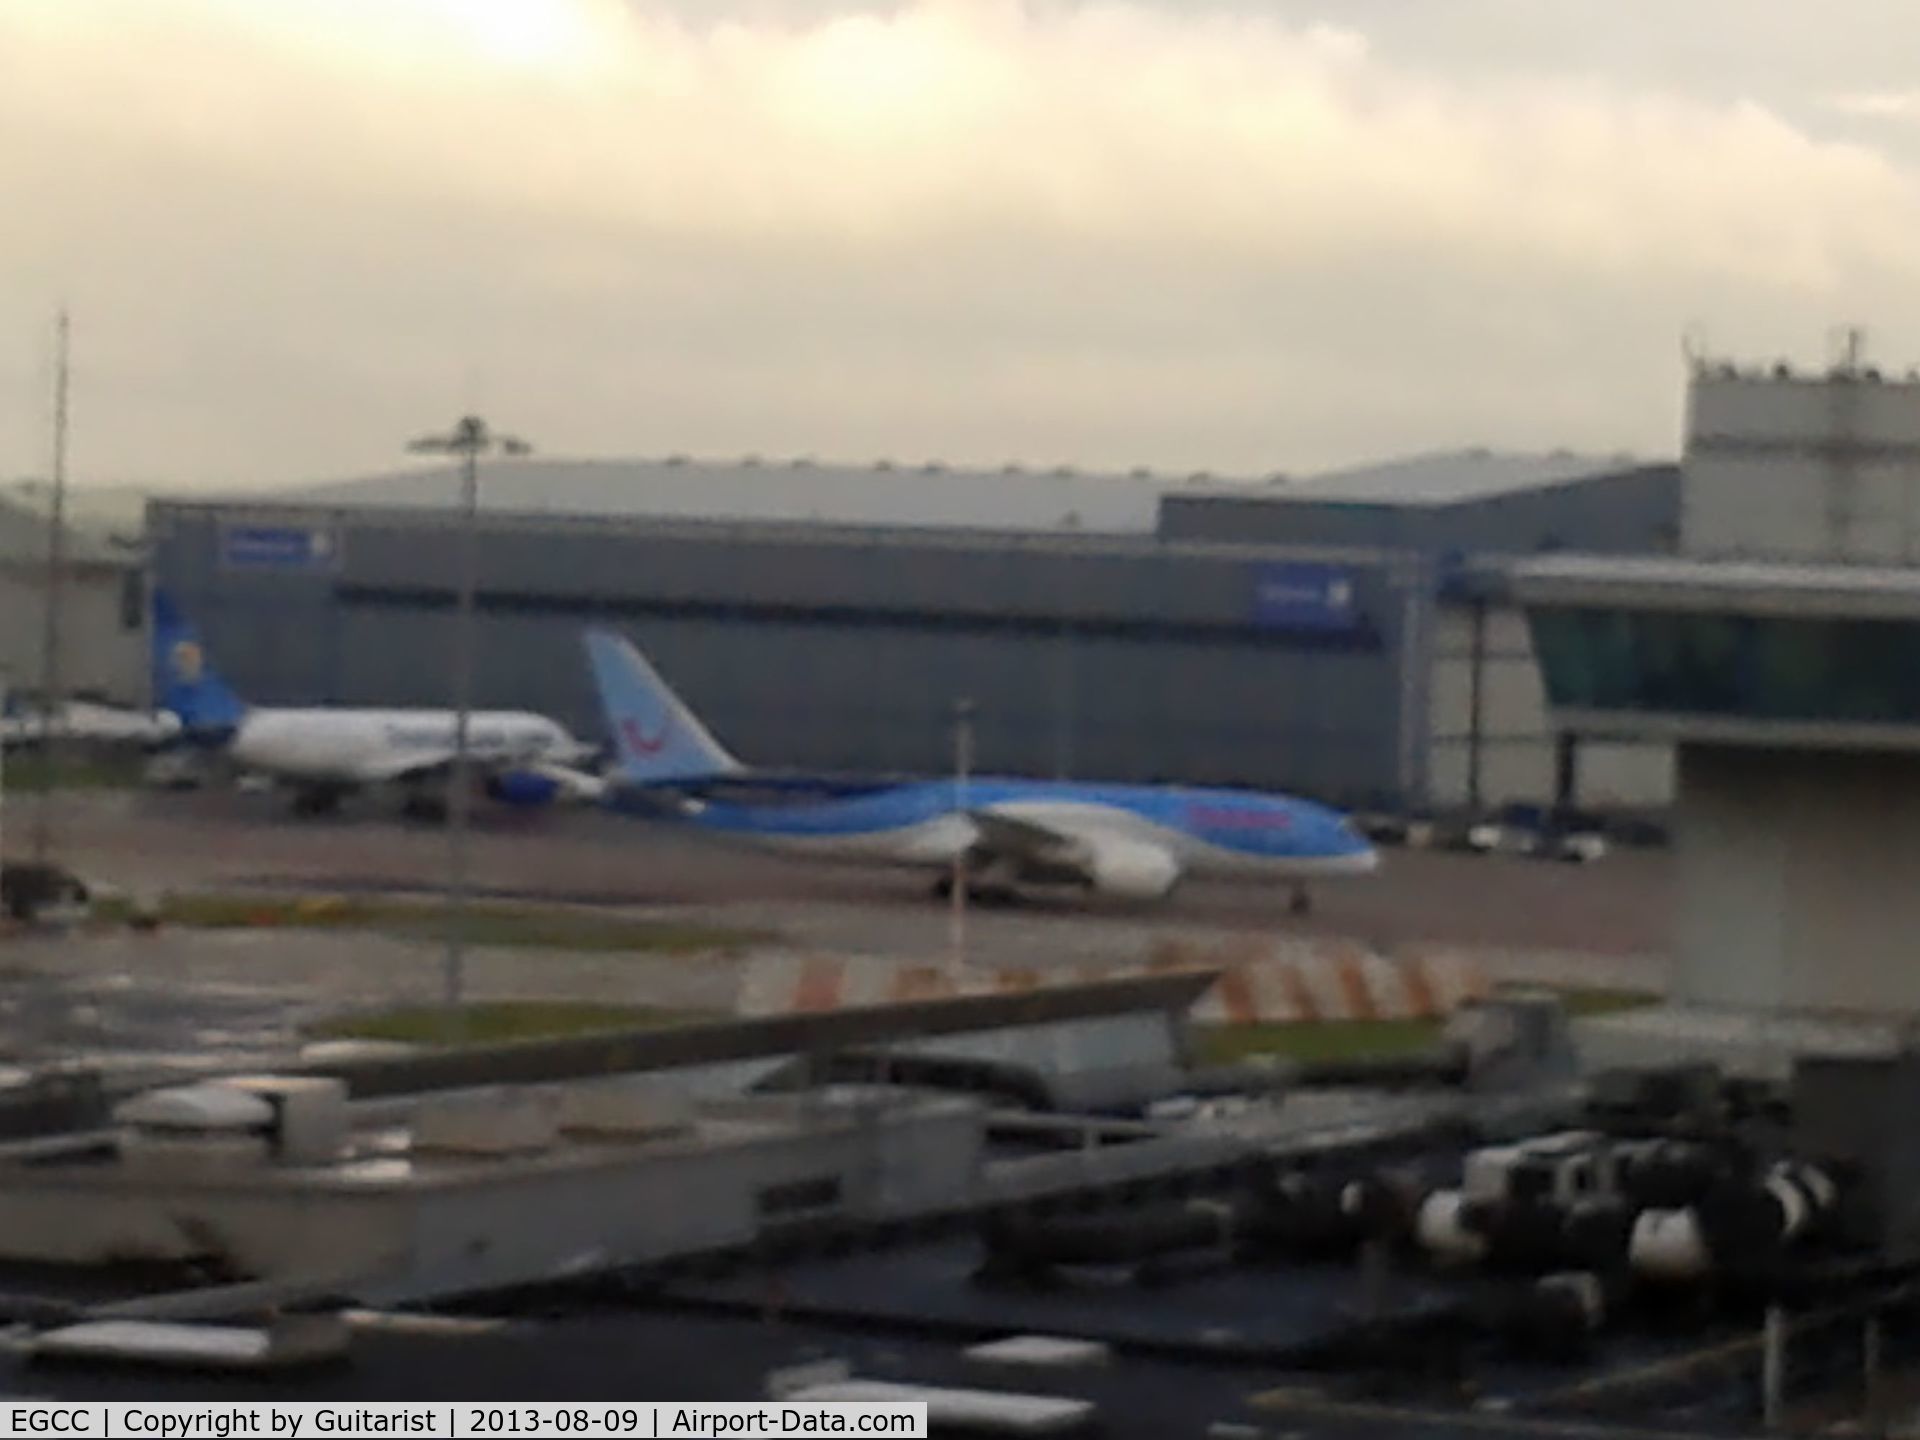 Manchester Airport, Manchester, England United Kingdom (EGCC) - Not seen a 787 before so a hurried photo on my mobile